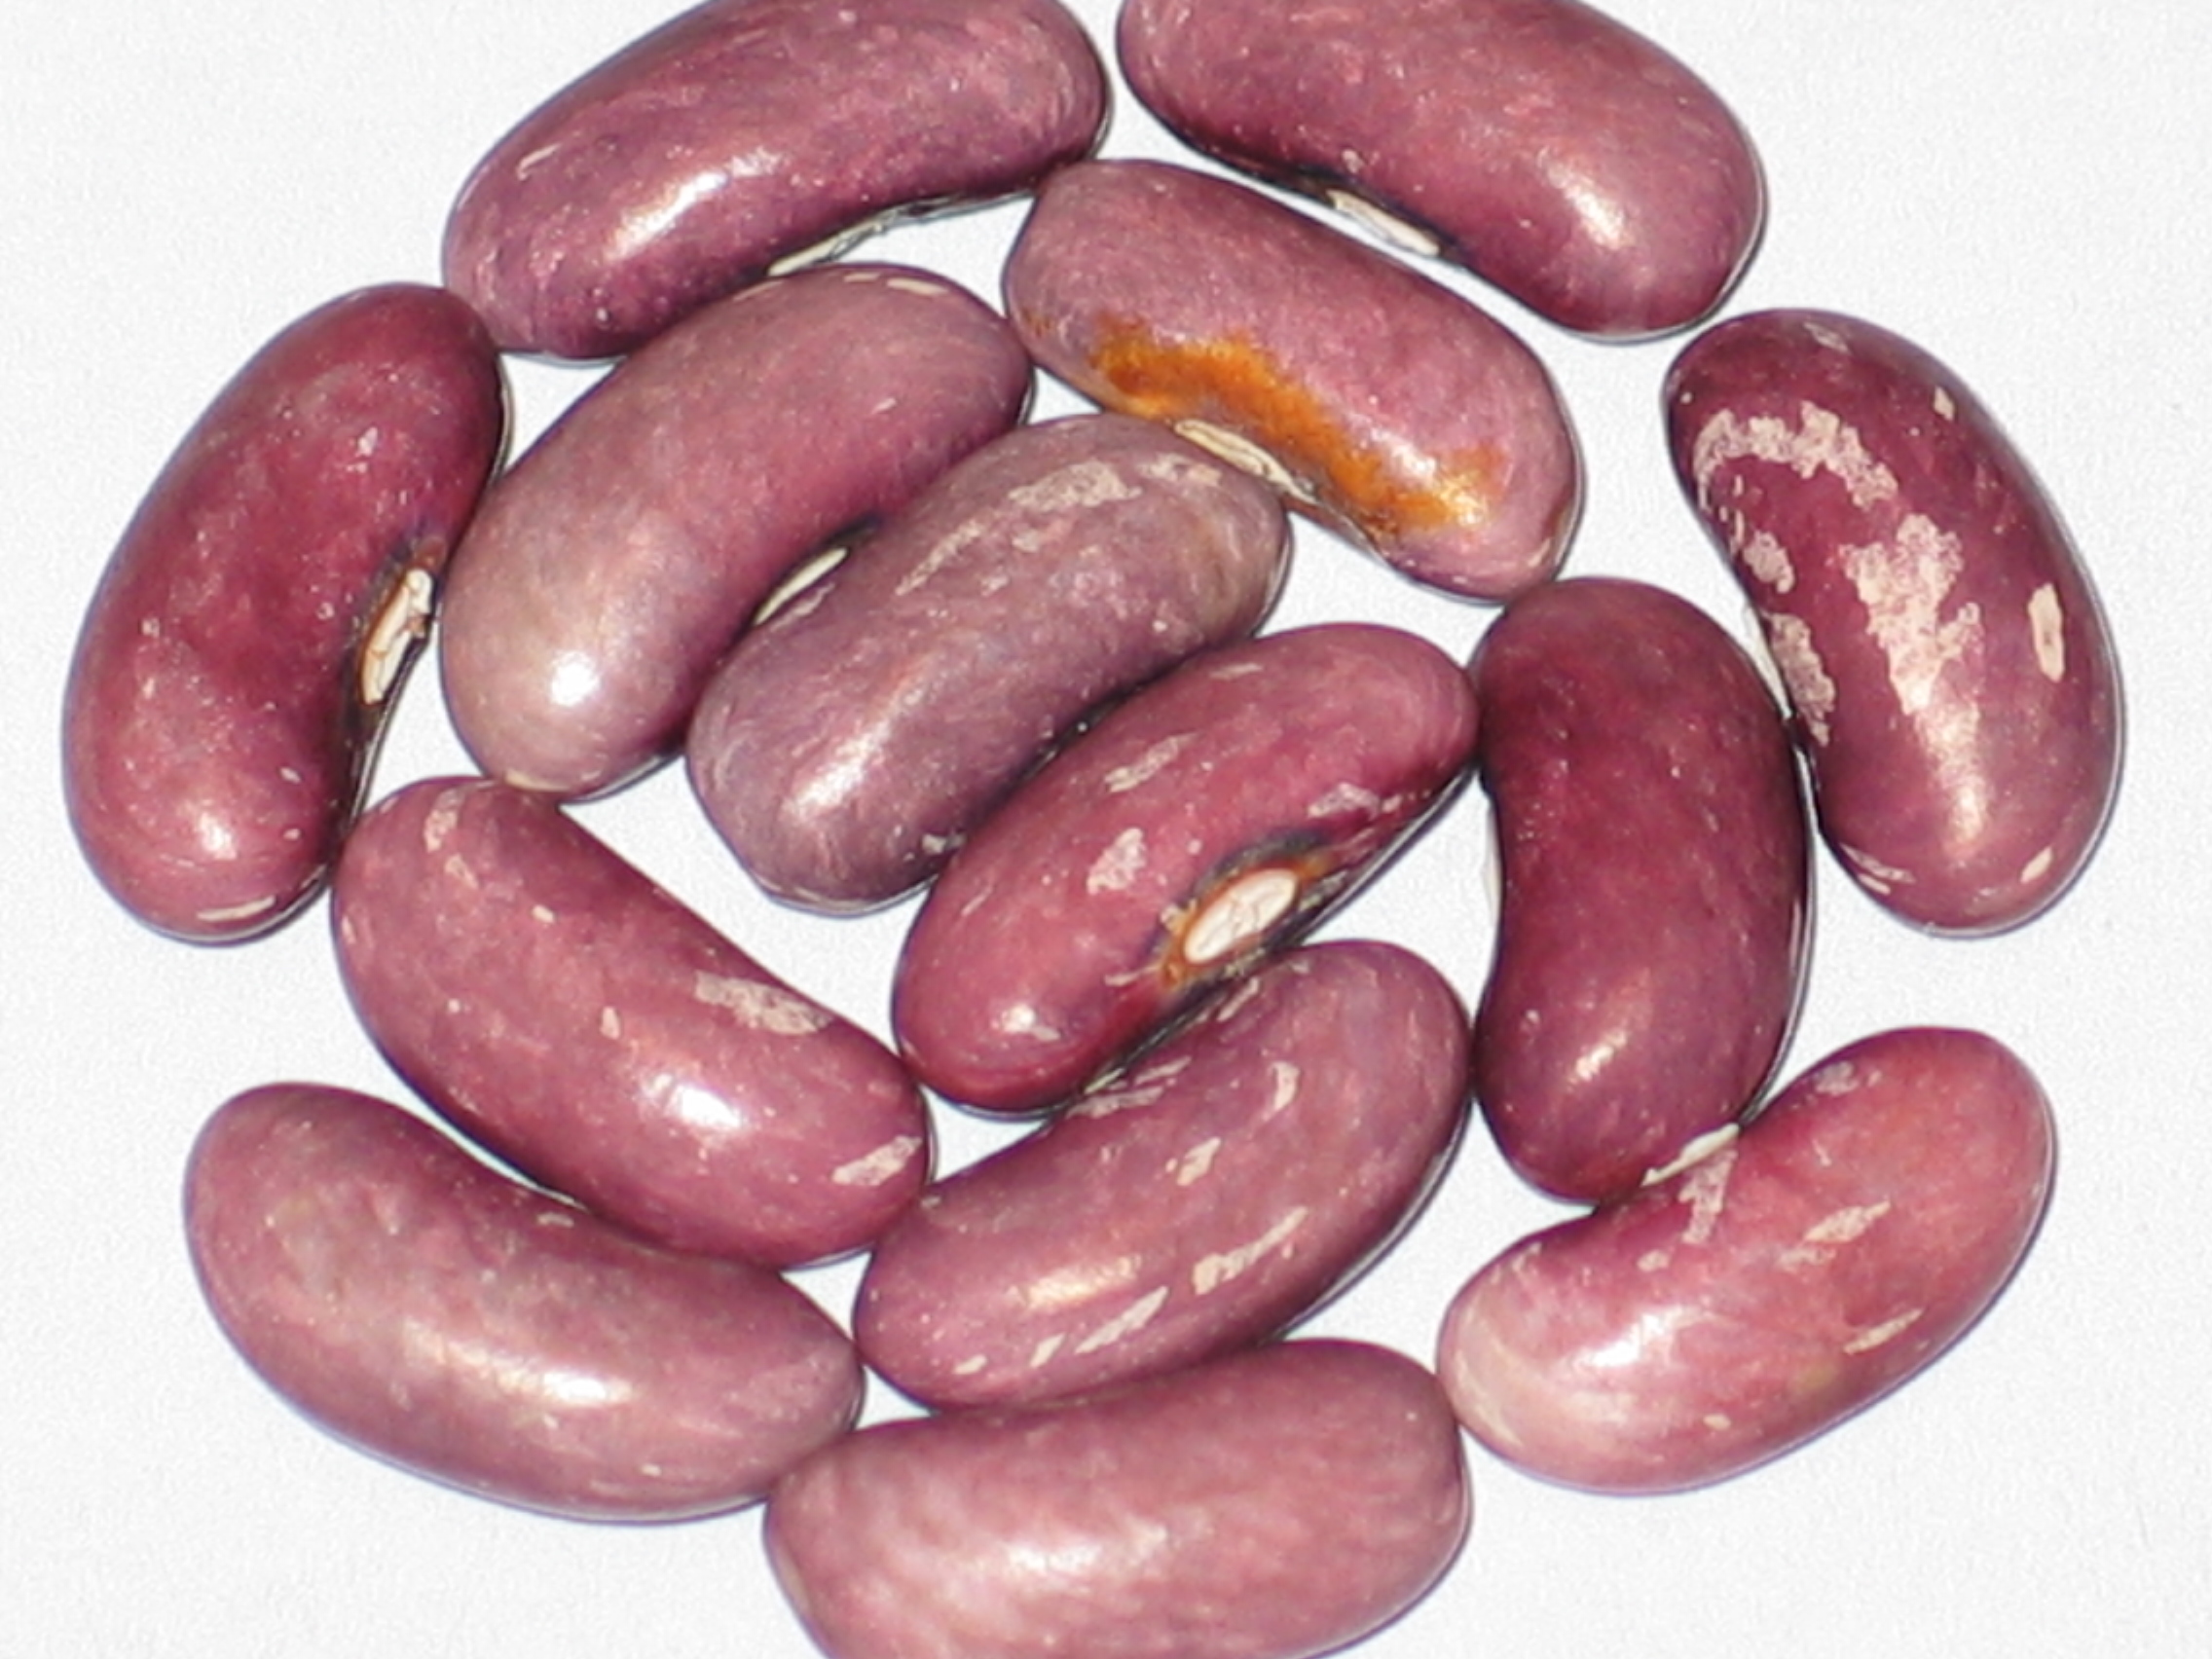 image of Atwater beans